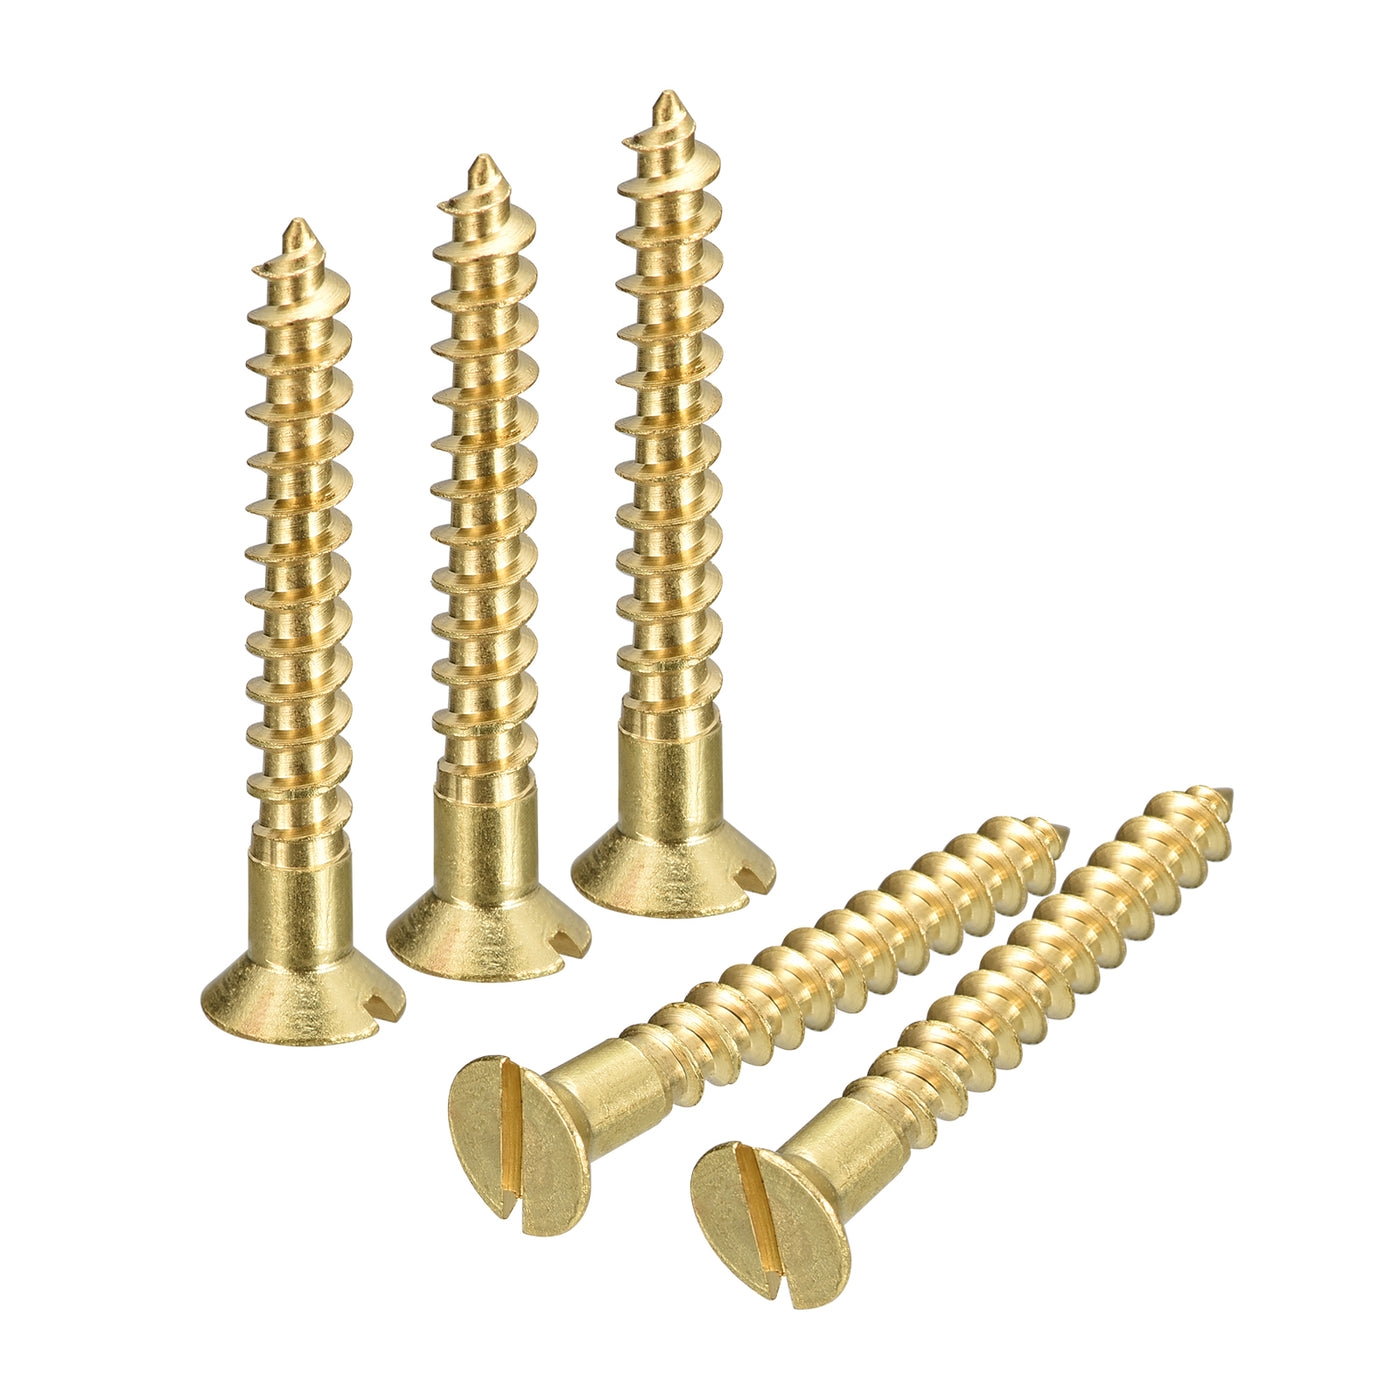 uxcell Uxcell 25Pcs M4.5 x 35mm Brass Slotted Drive Flat Head Wood Screws Self Tapping Screw